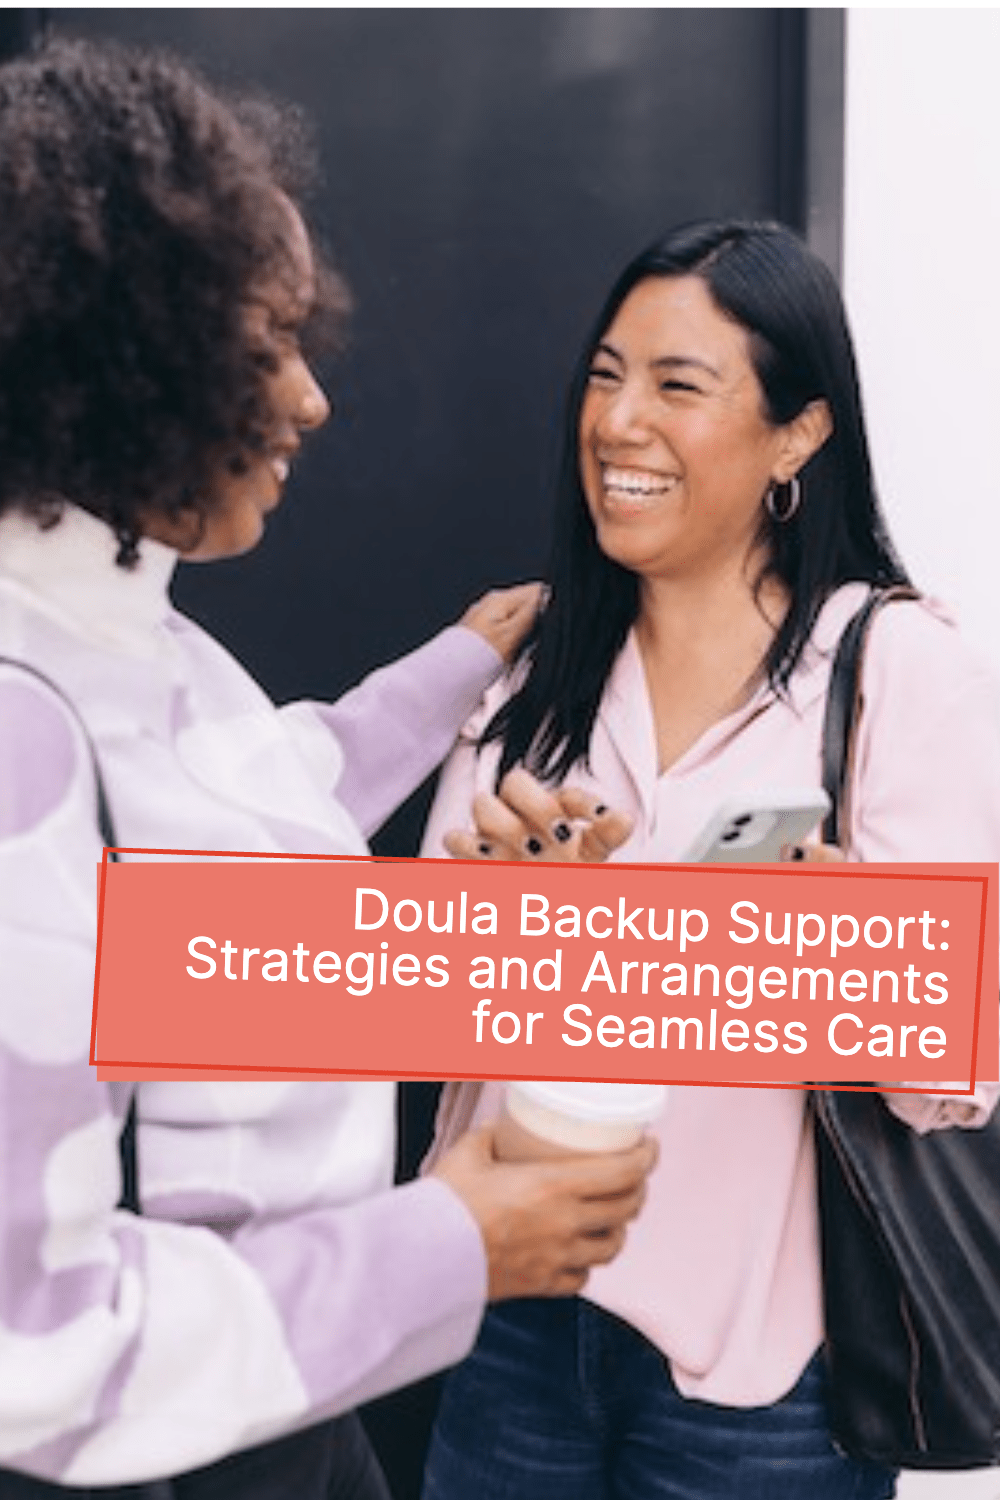 Doula backup support